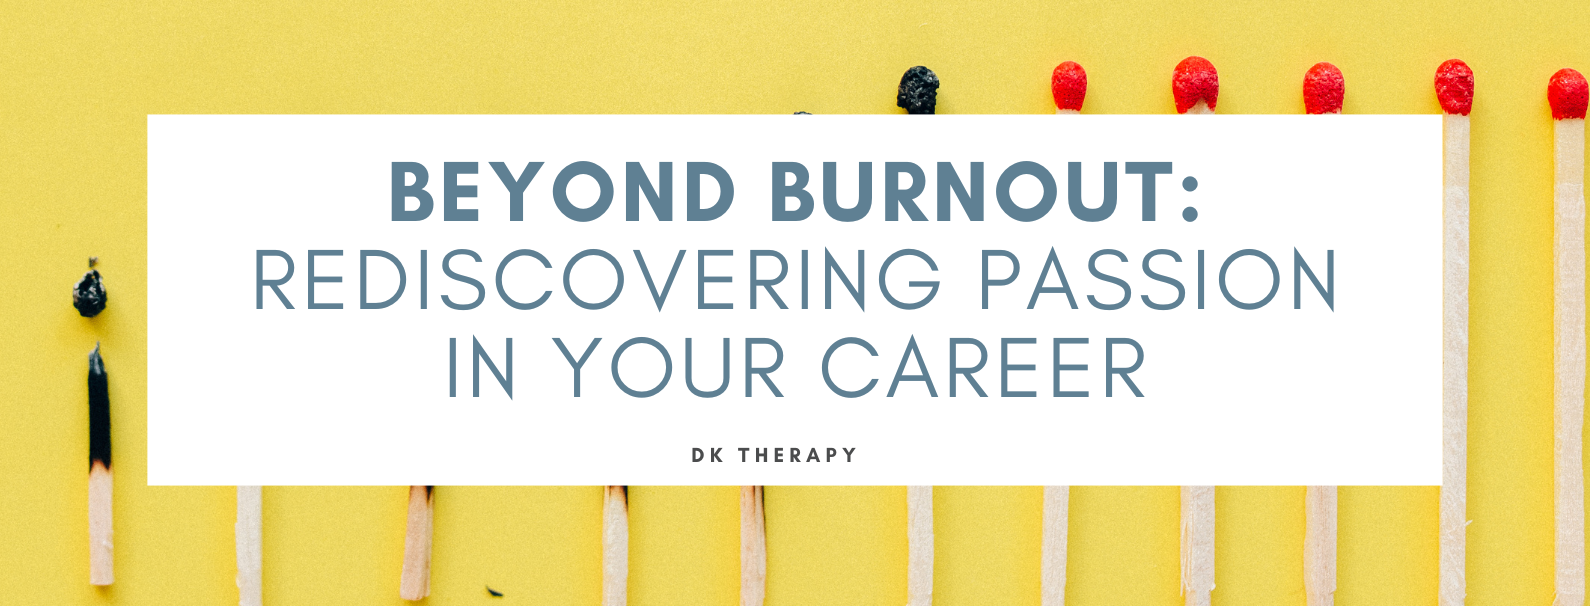 Beyond Burnout: Rediscovering Passion in Your Career